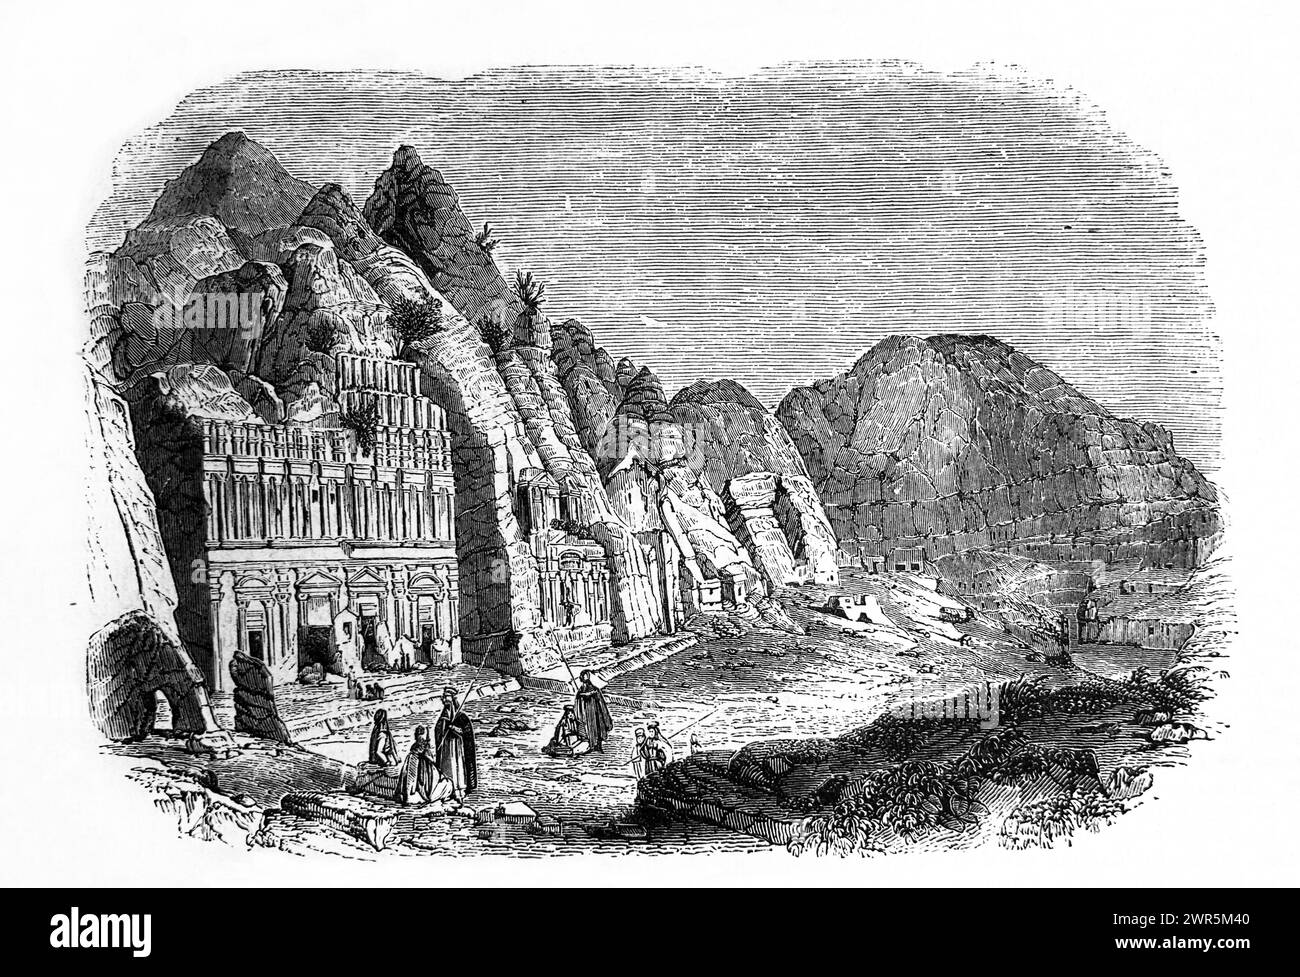 Illustration of Joktheel-A View of the Palace Tomb Nabatean Rock Cut Tombs in Petra Jordan from Antique 19th Century Illustrated Family Bible Stock Photo